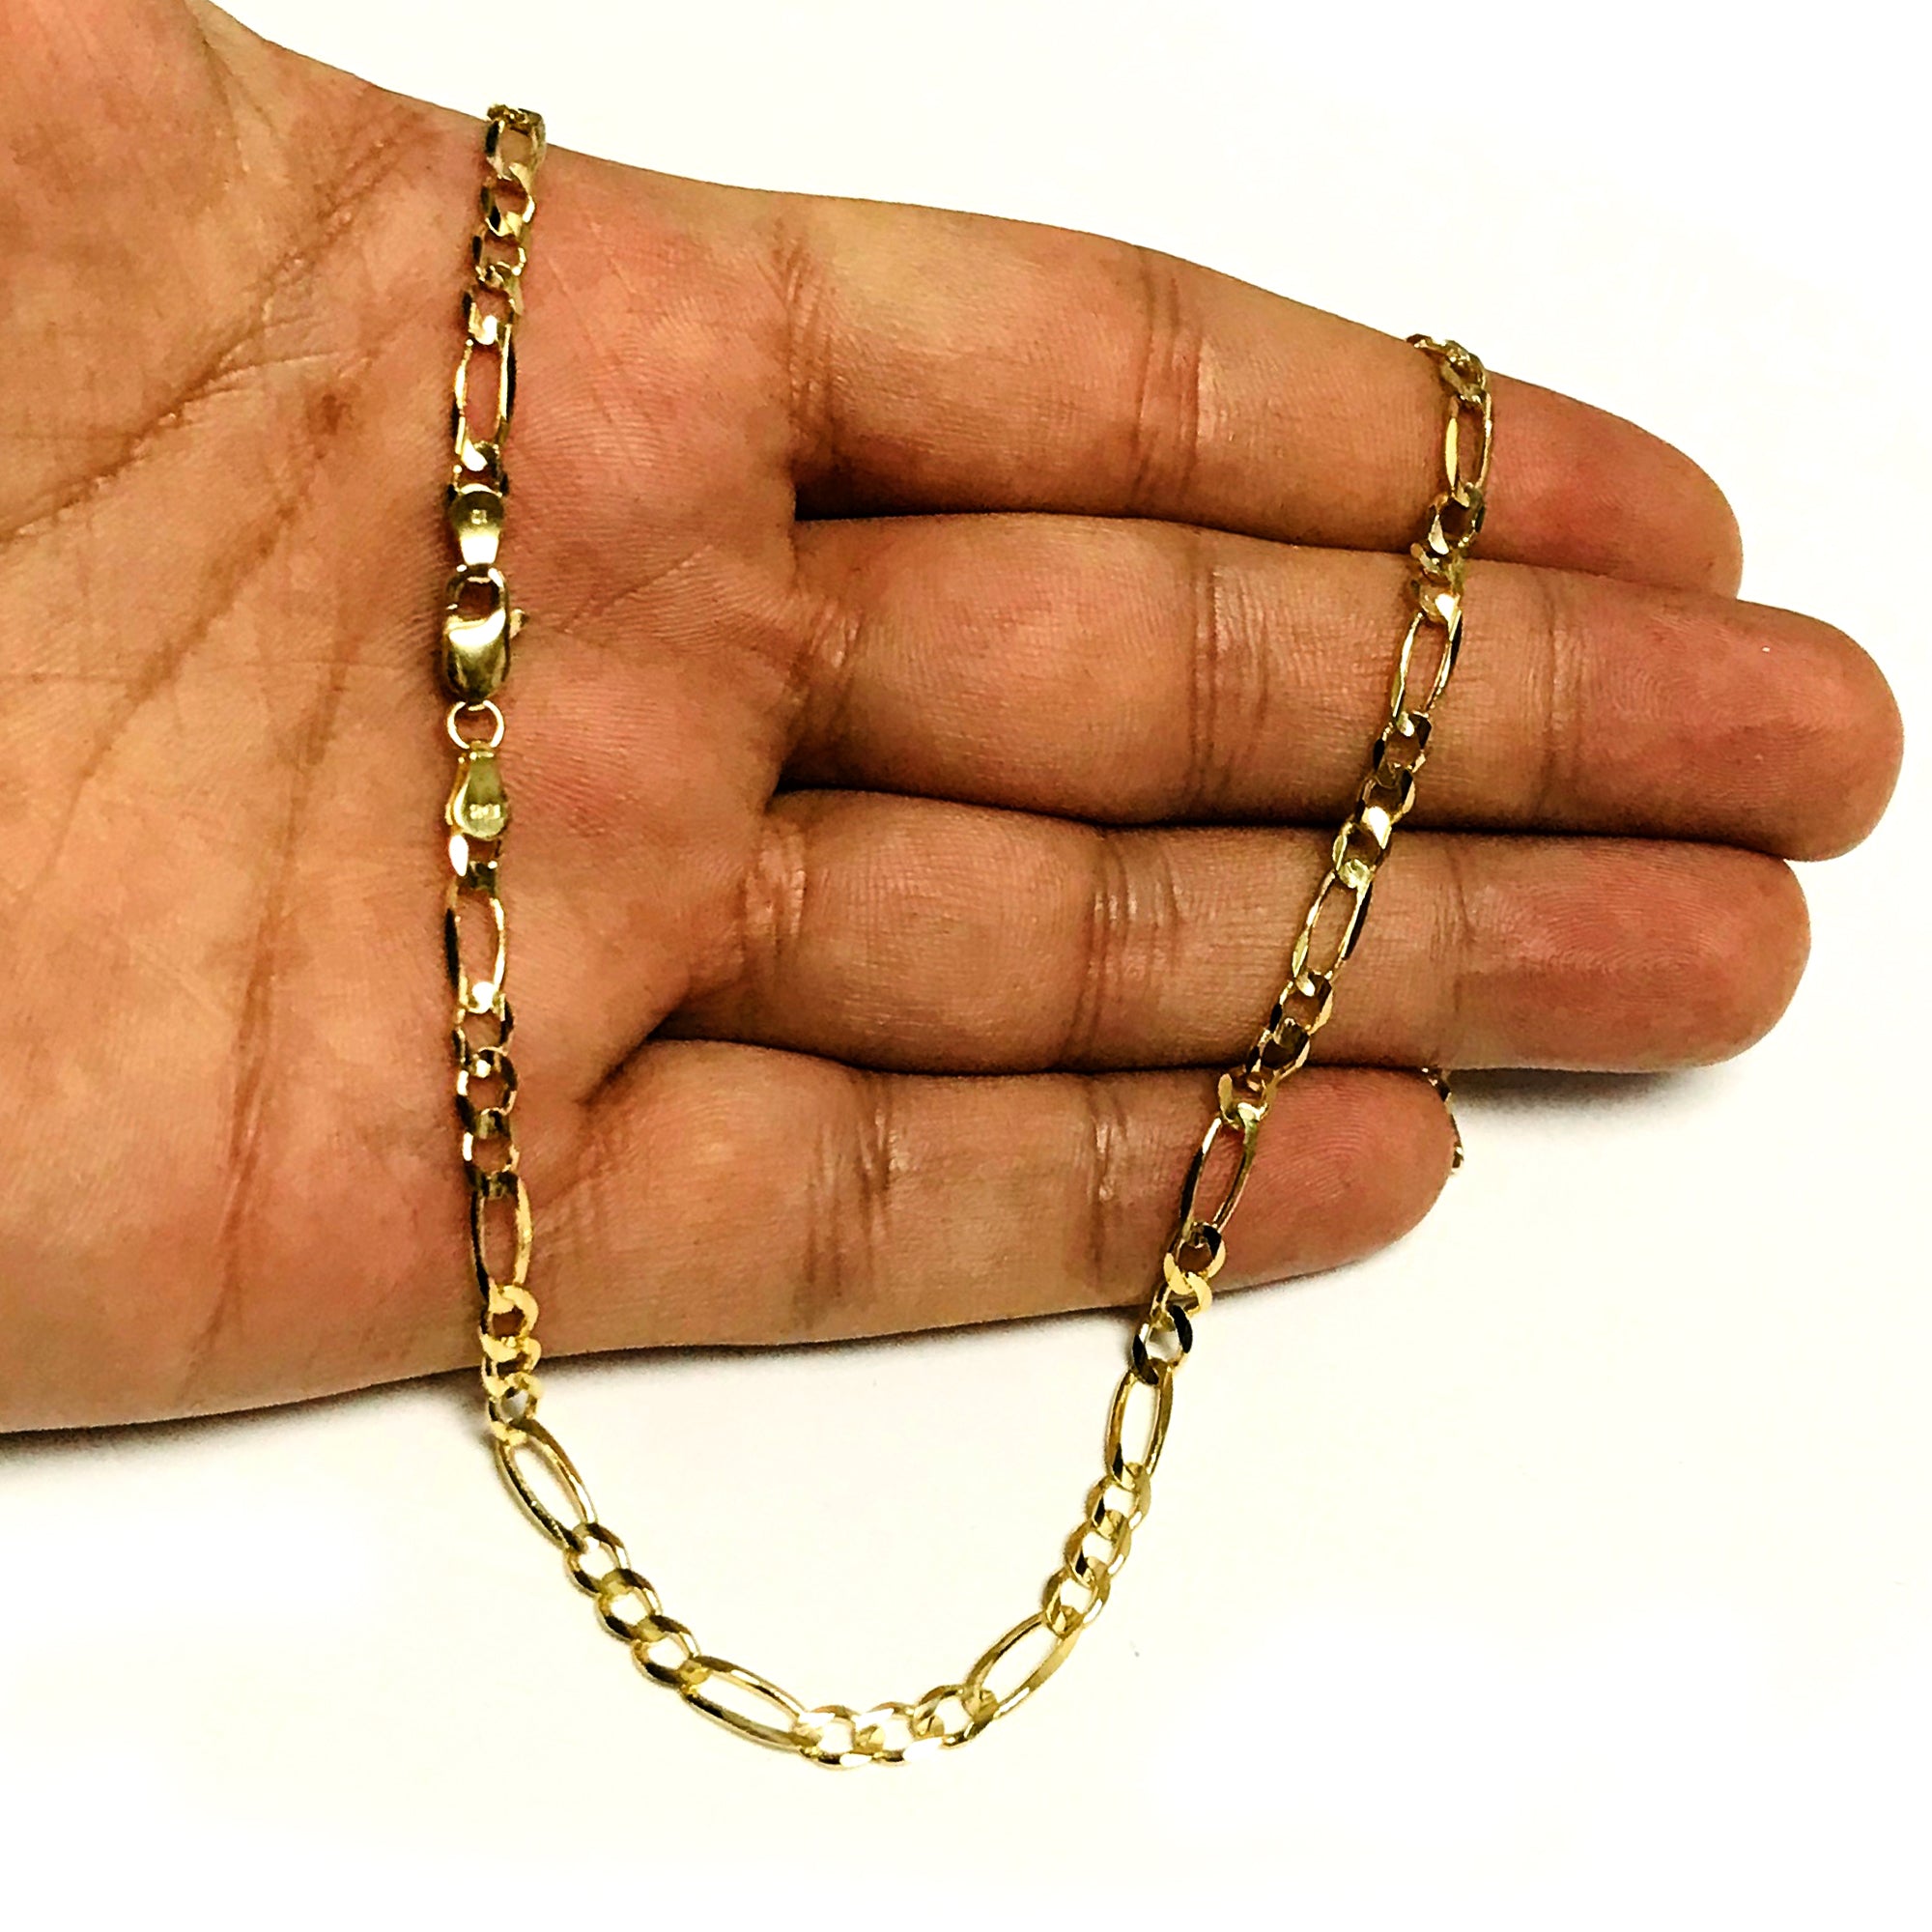 14k Yellow Solid Gold Figaro Chain Necklace, 3.6mm